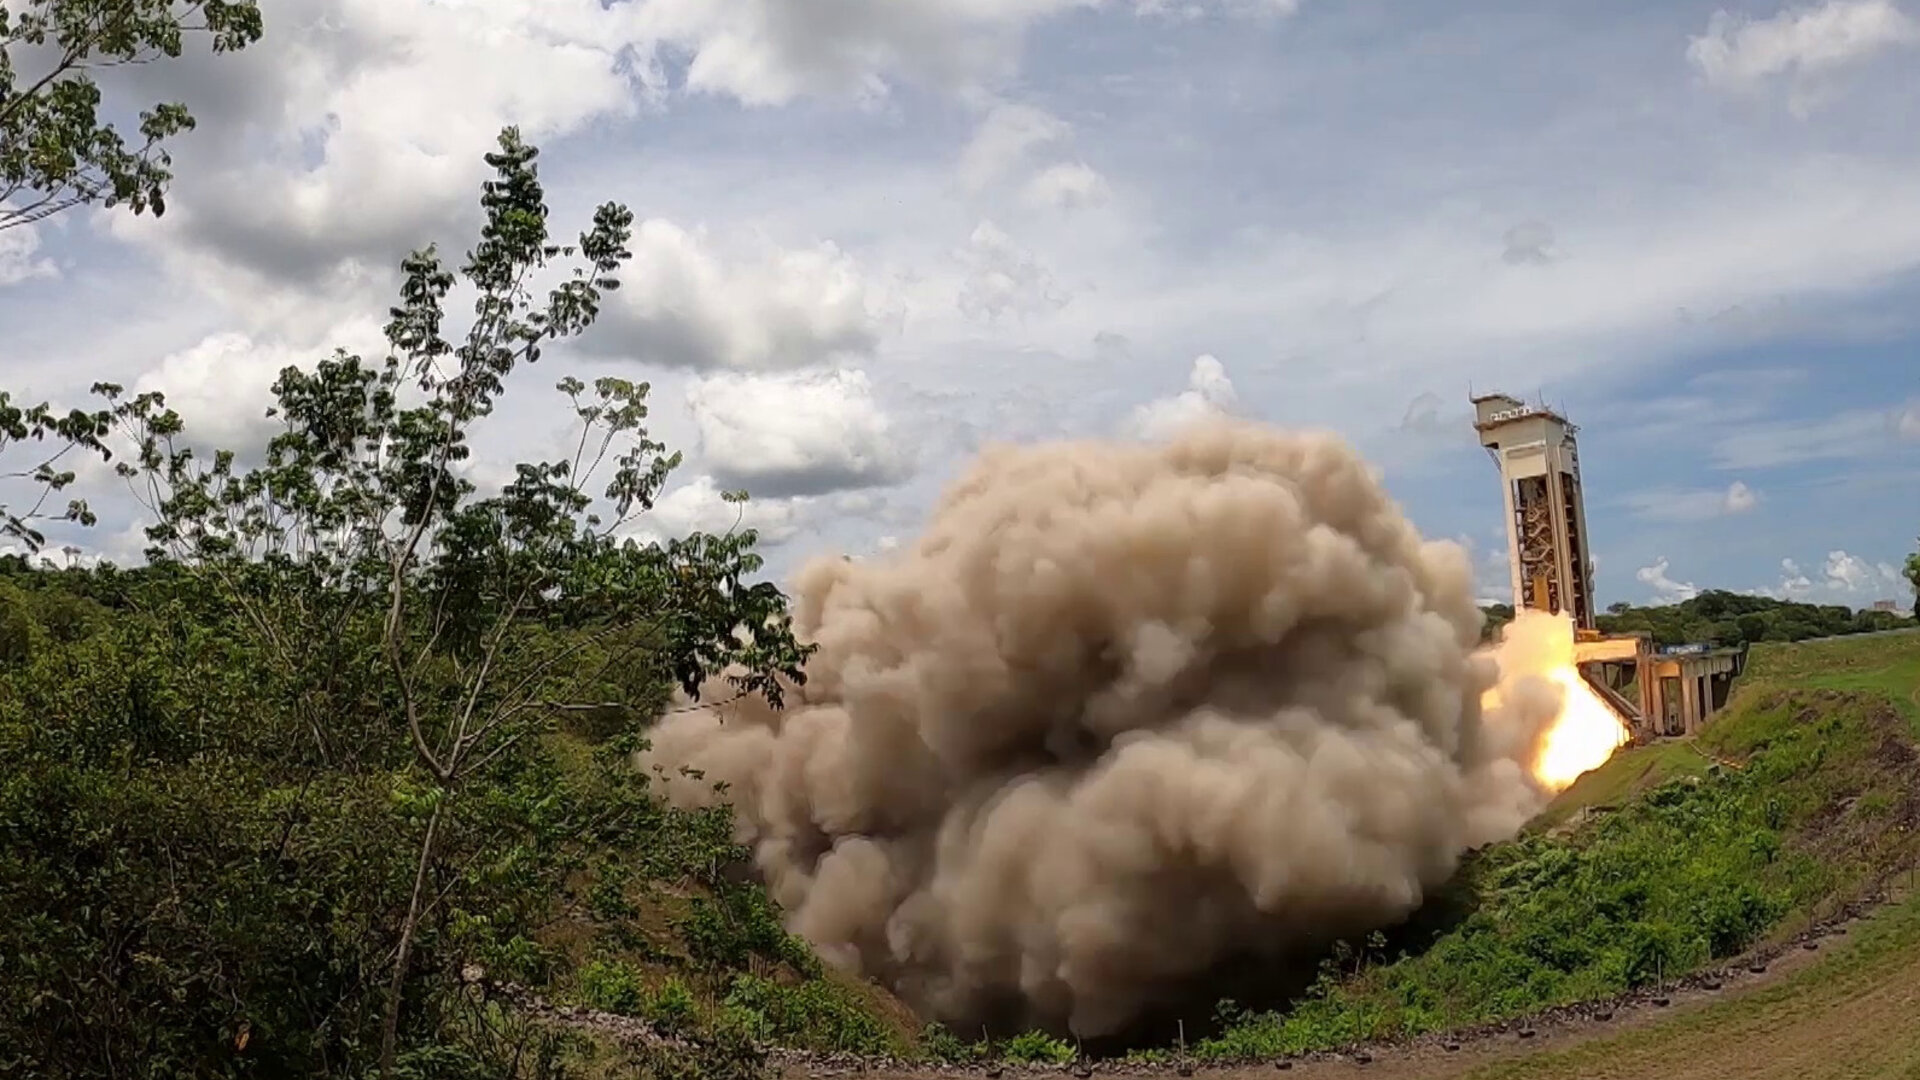 The second qualification model of the P120C solid rocket motor, configured for Ariane 6, completed its hot firing on 7 October 2020 at Europe's Spaceport in French Guiana.